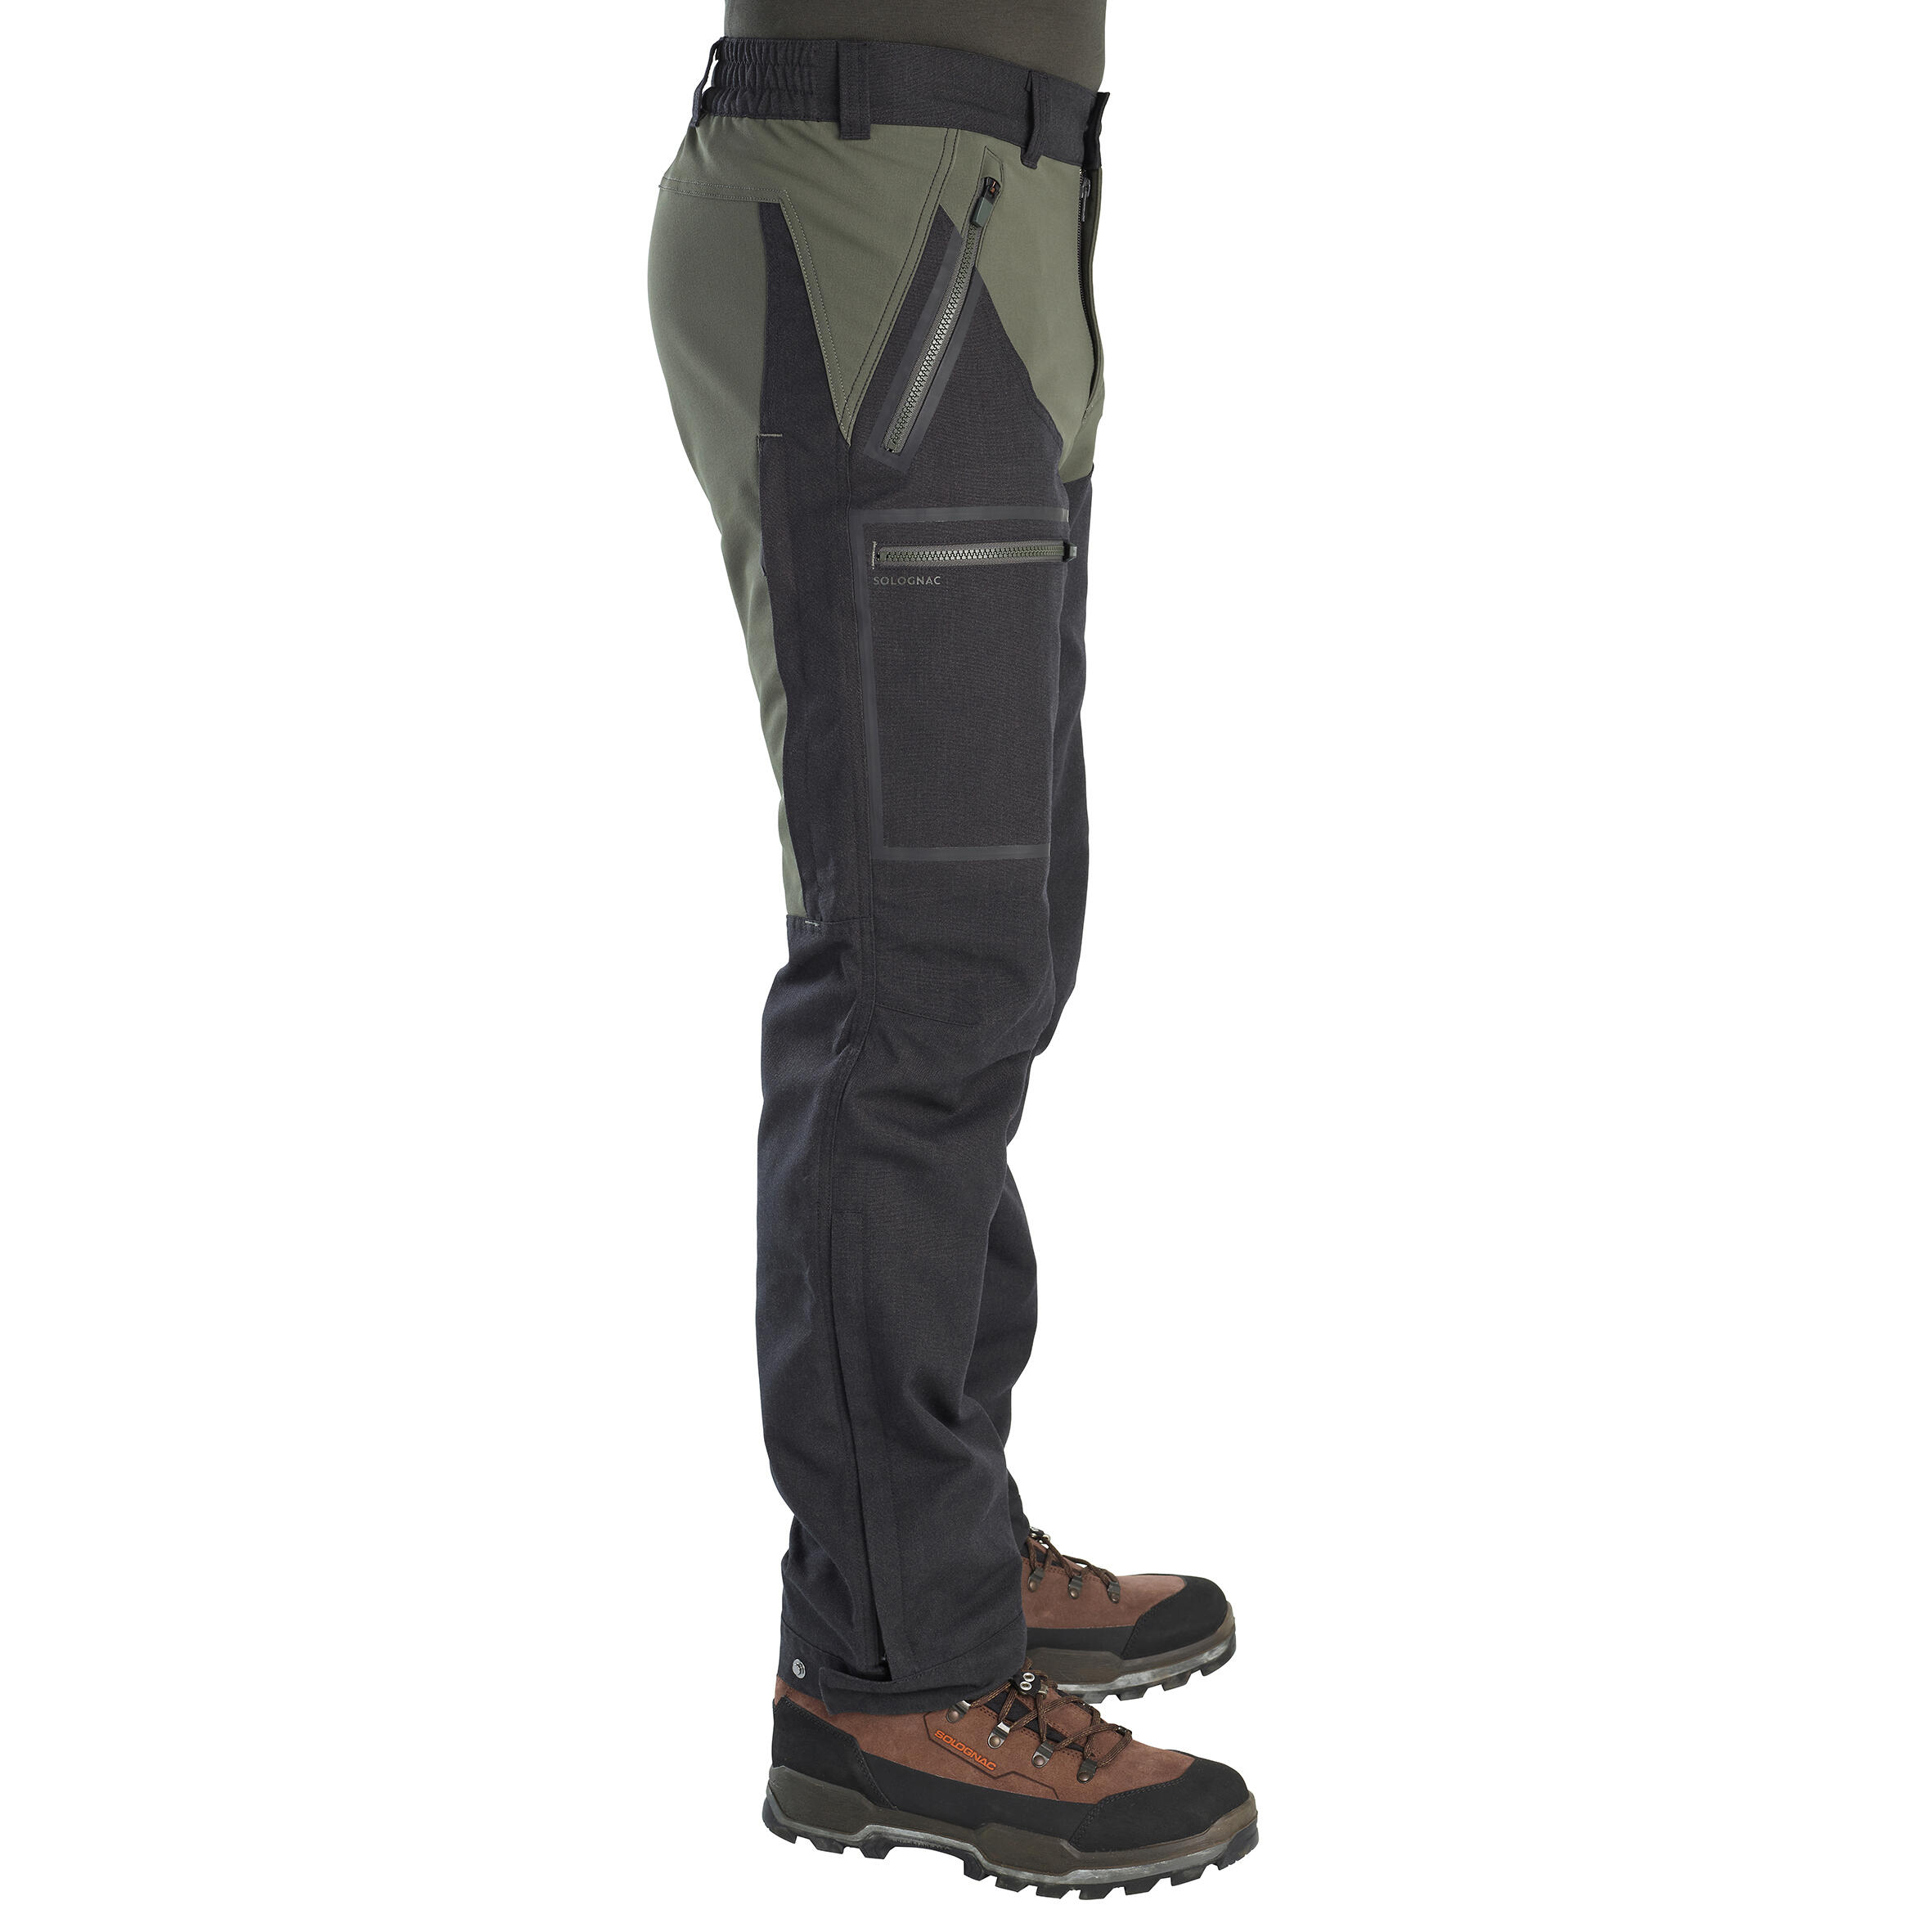 Solognac Men's Hunting Pants 520 in Khaki, Size Small | Hunting pants,  Pants, Trousers details